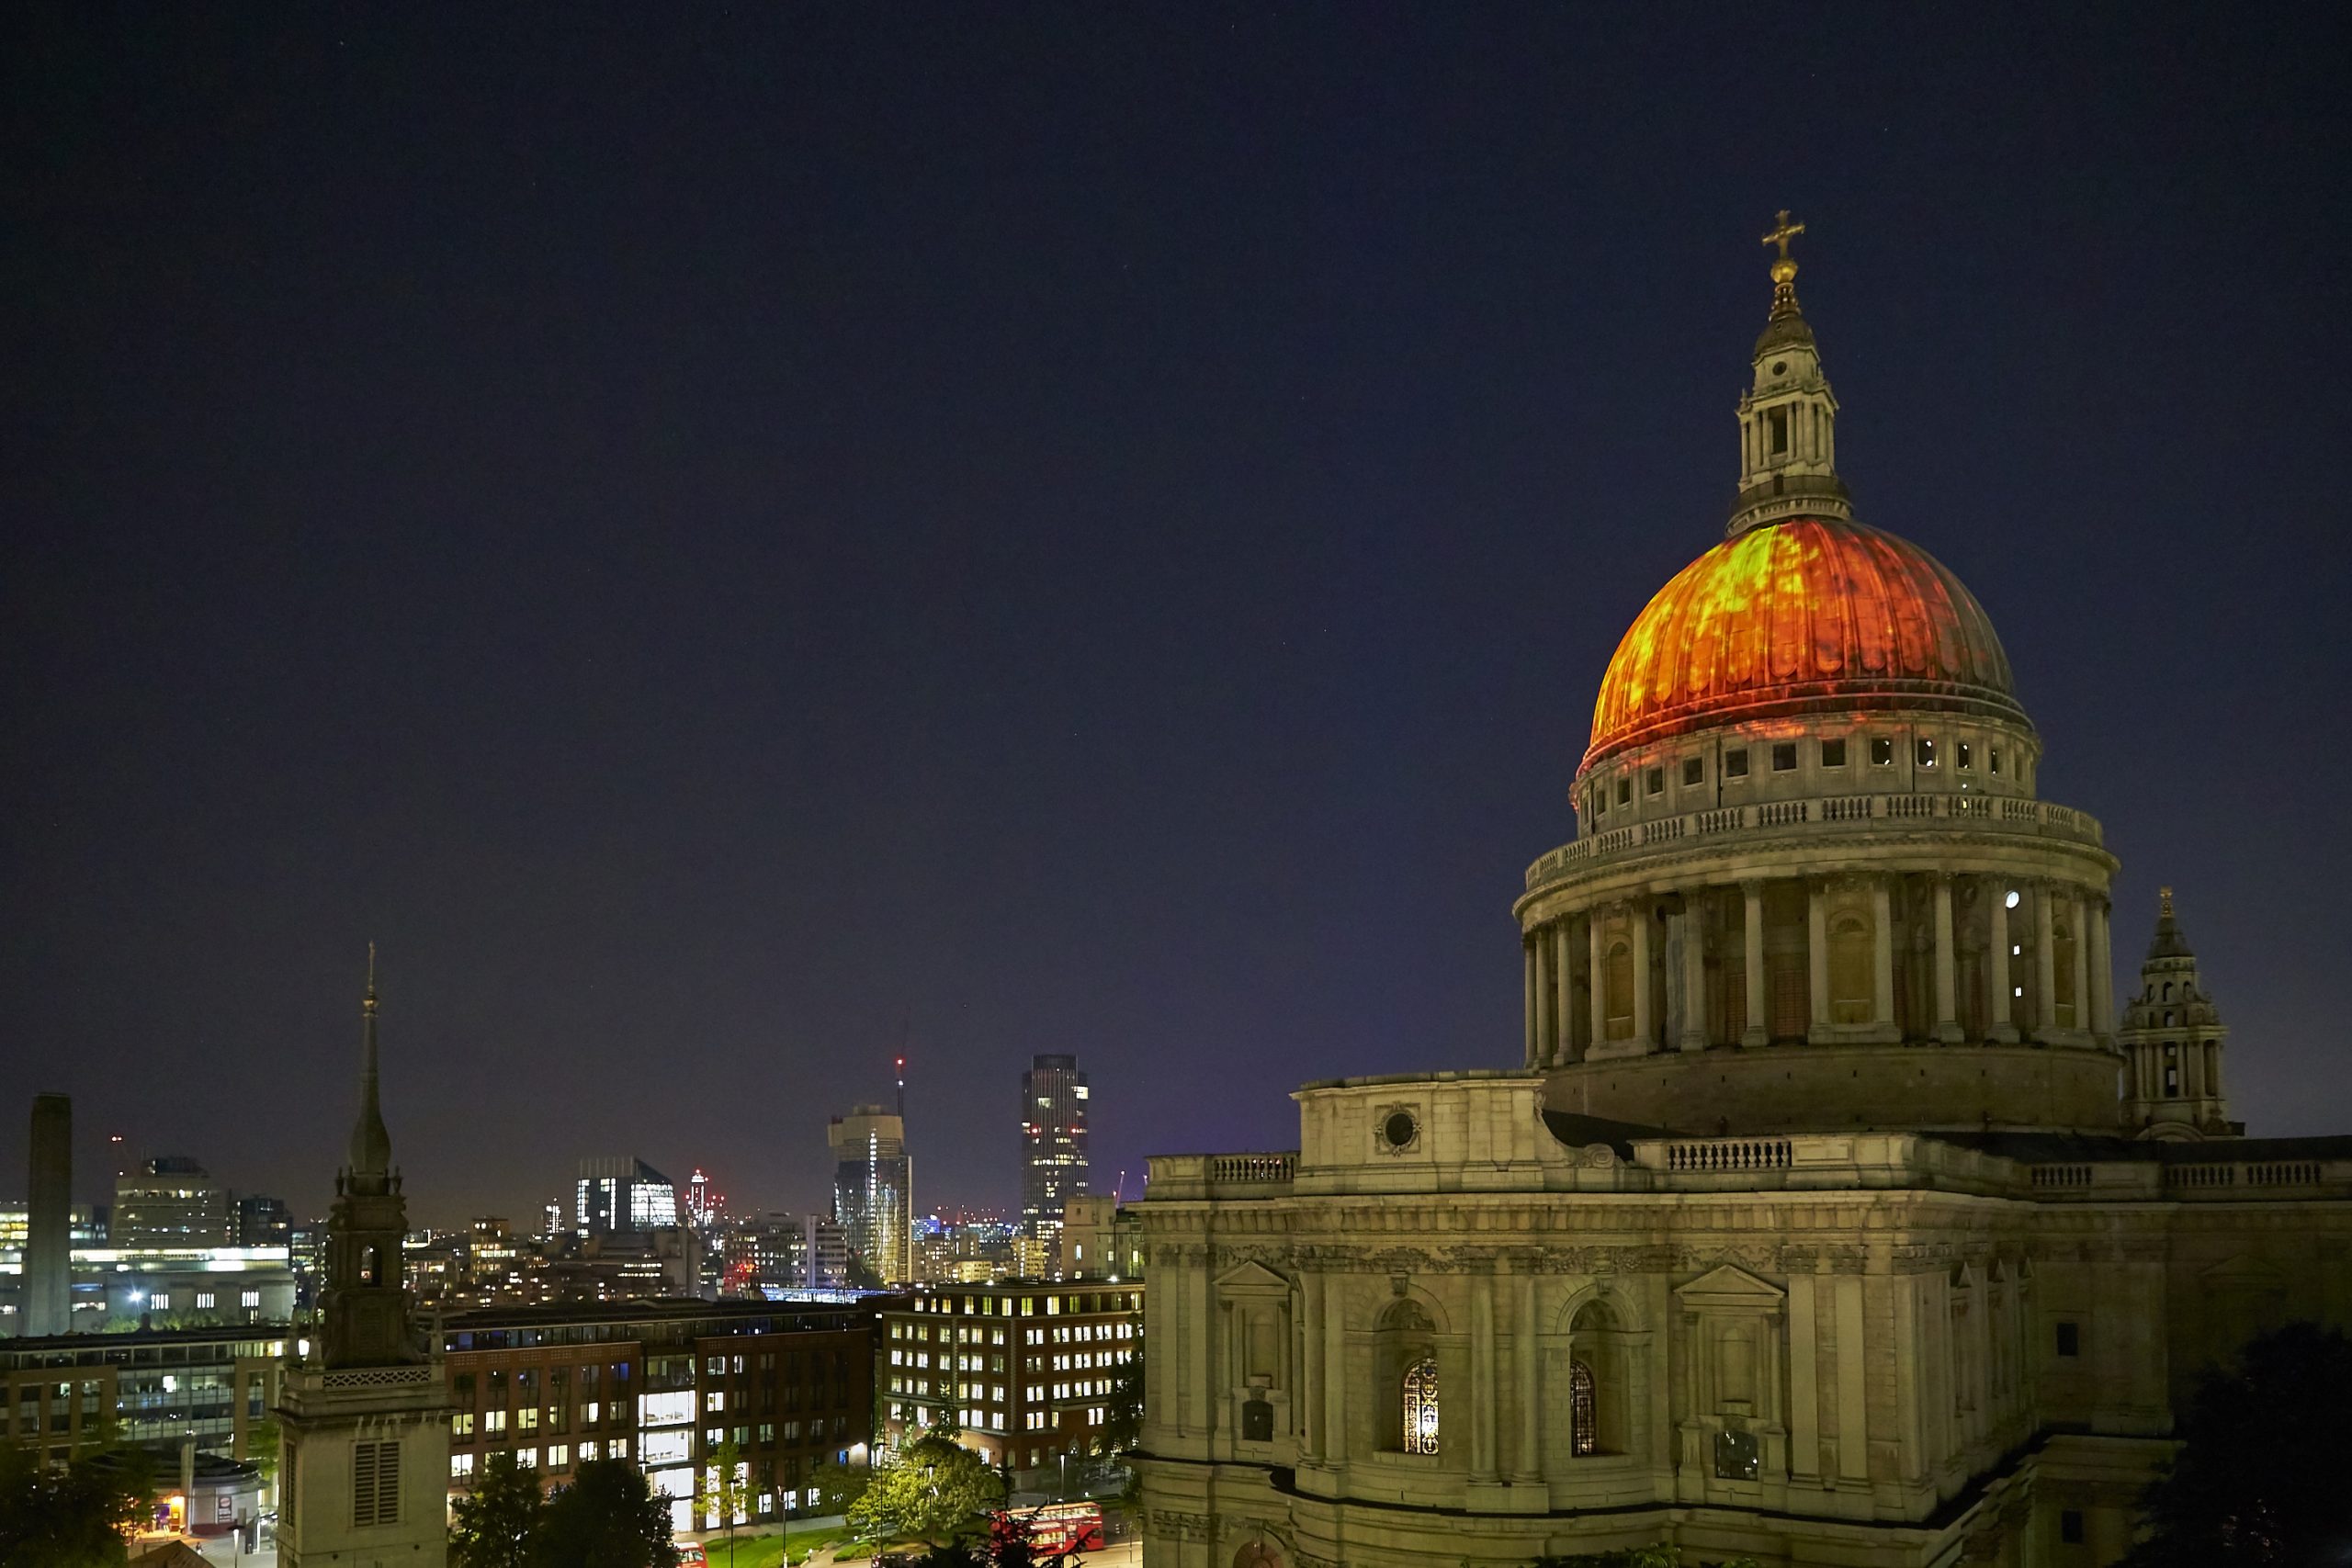 Imagery of flames projected onto the roof of St Pauls Cathedral